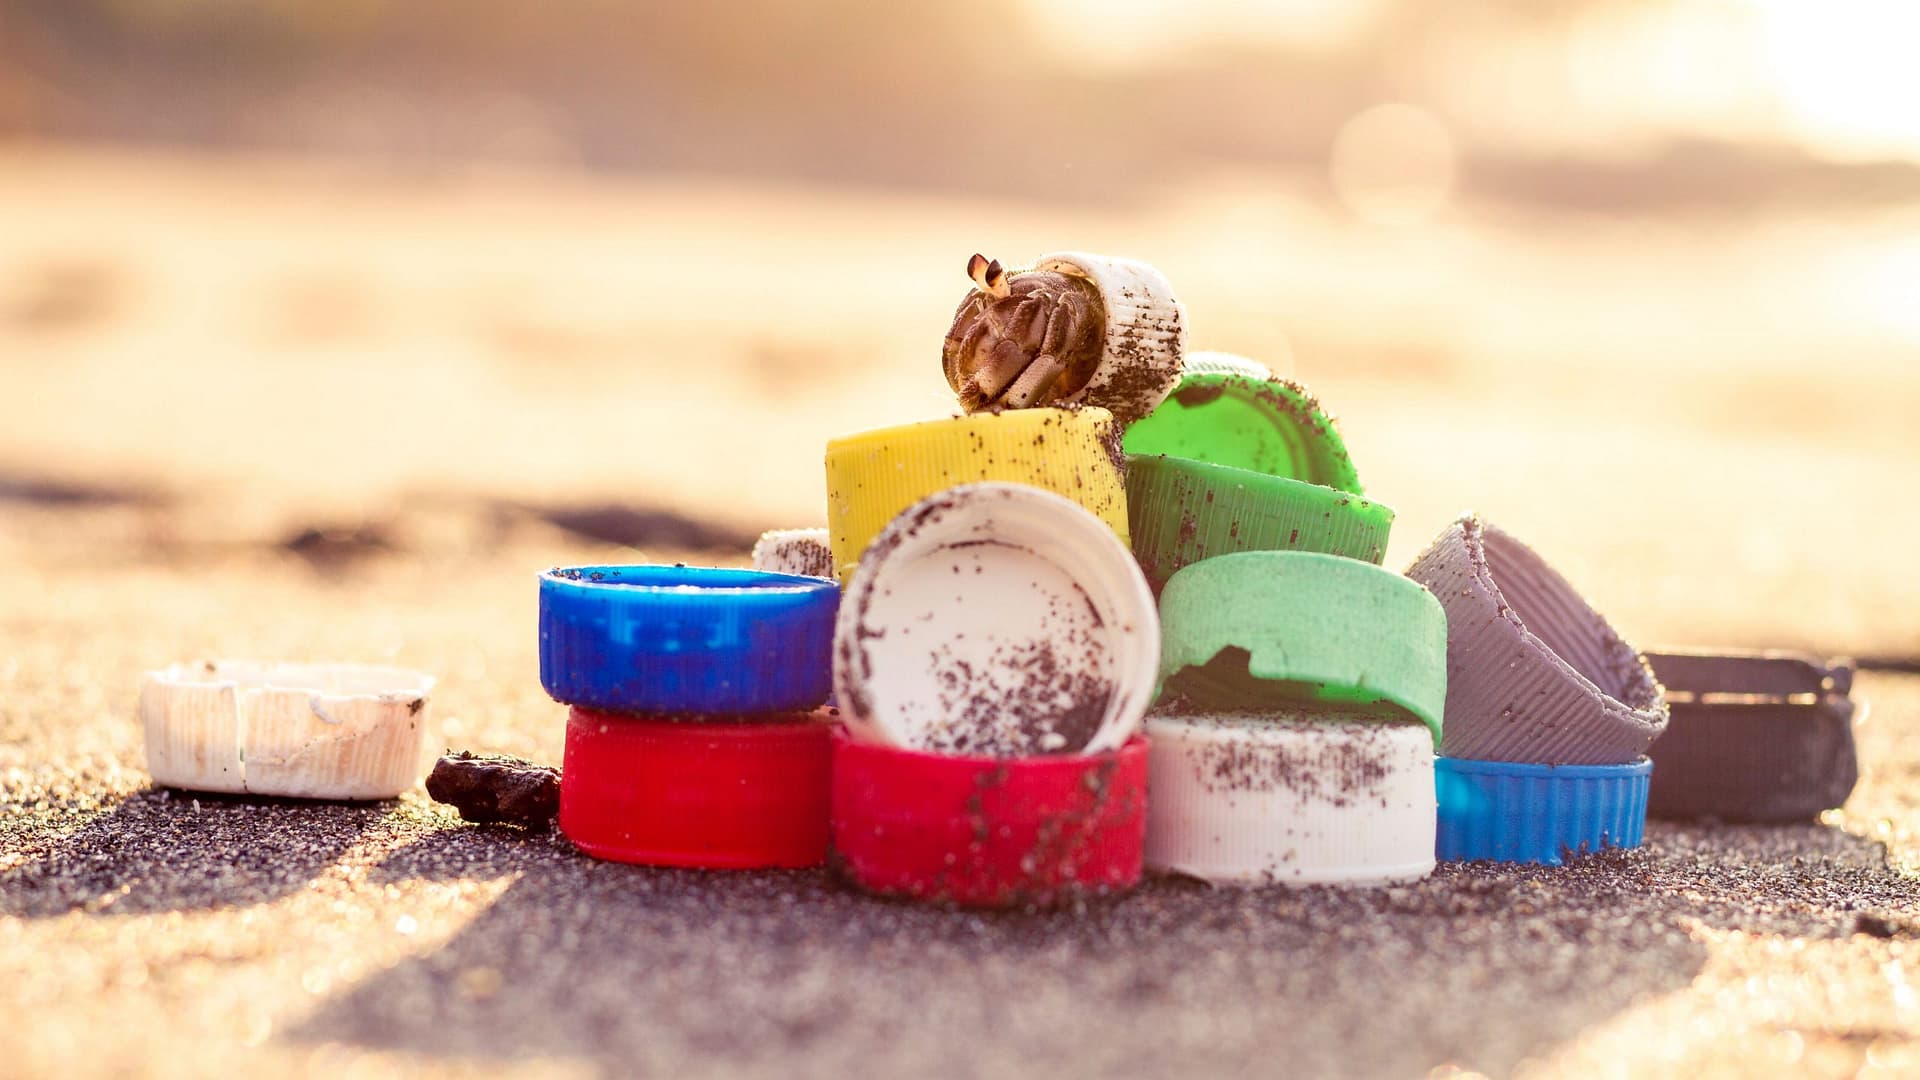 Image: hermit crab on a colorful pile of bottle caps, eat plastic